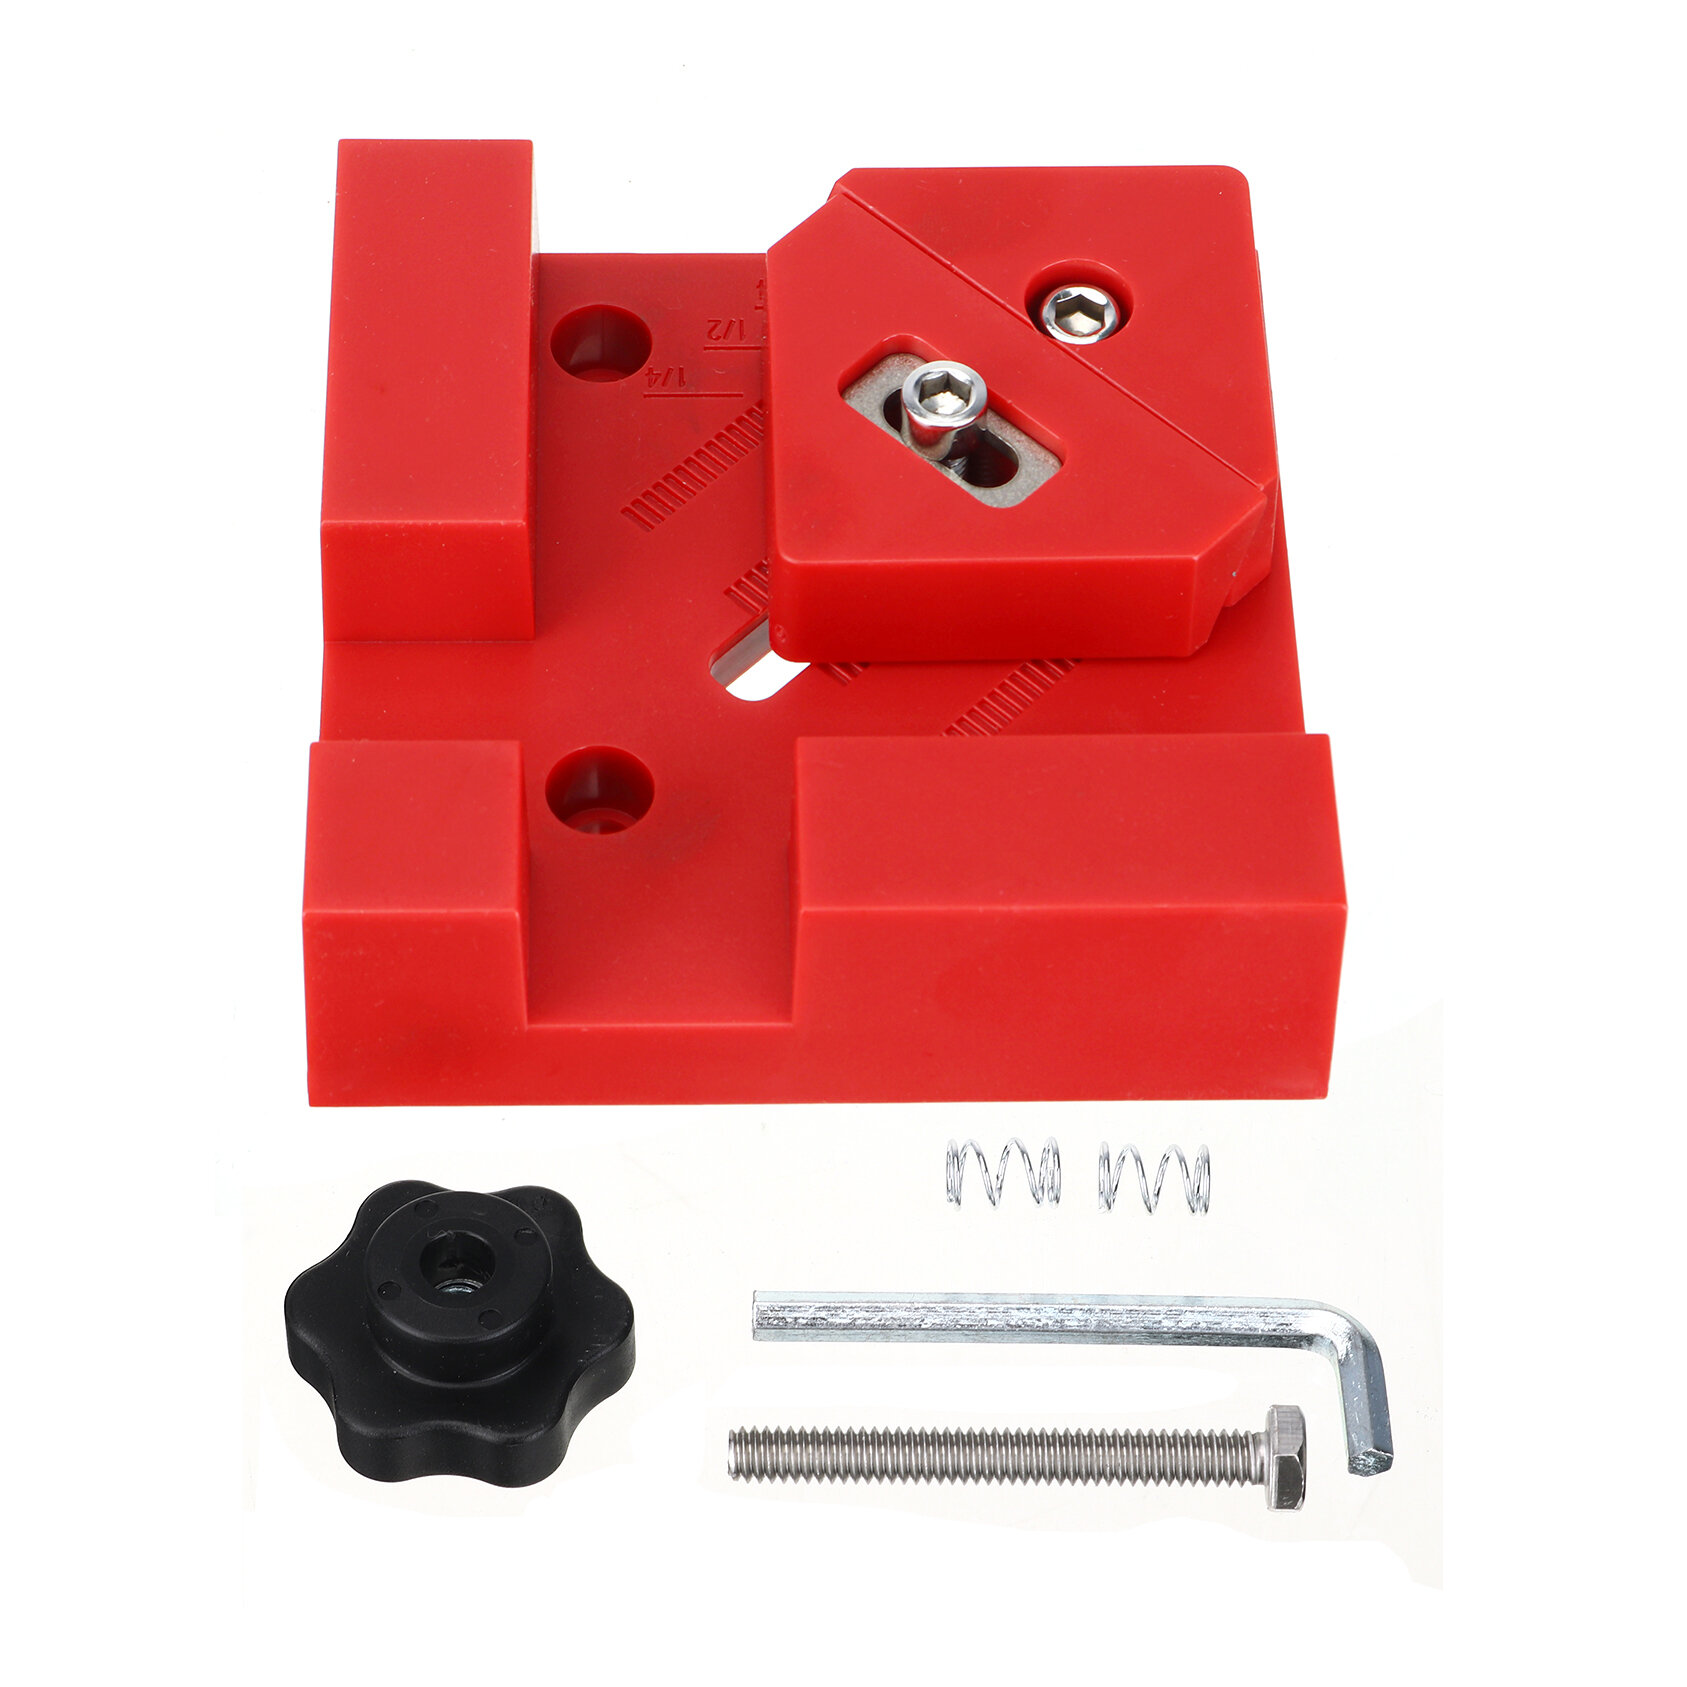 1PCS 90 Degree Right Angle Clamp Spring Clamp Adjustable Swing Angle Clamp Frame Cabinet Clip COD